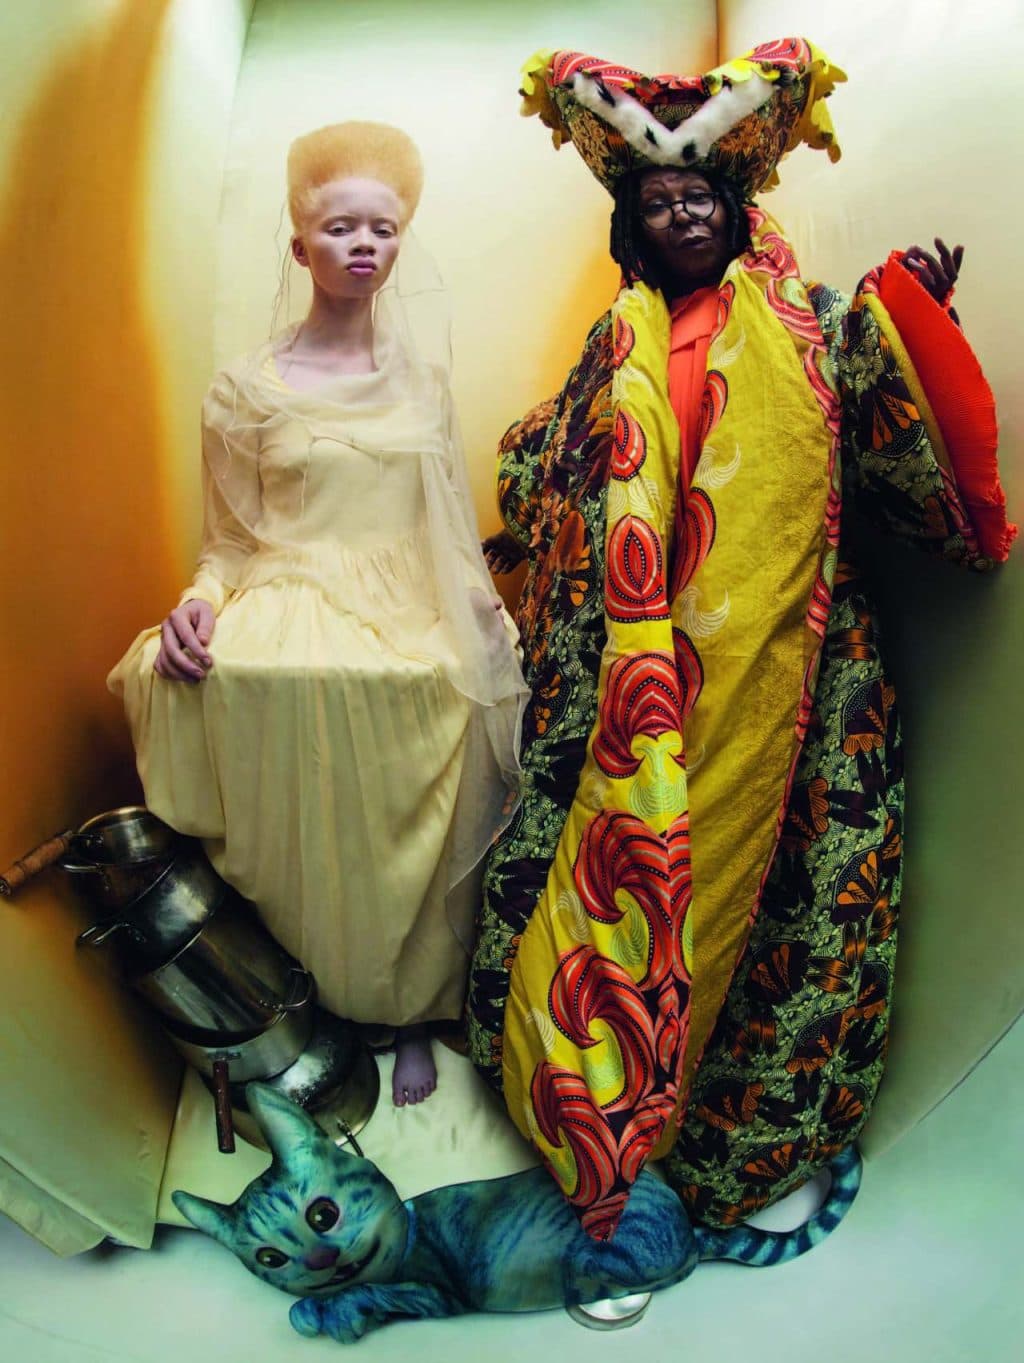 Back to the birth of imagination with Tim Walker